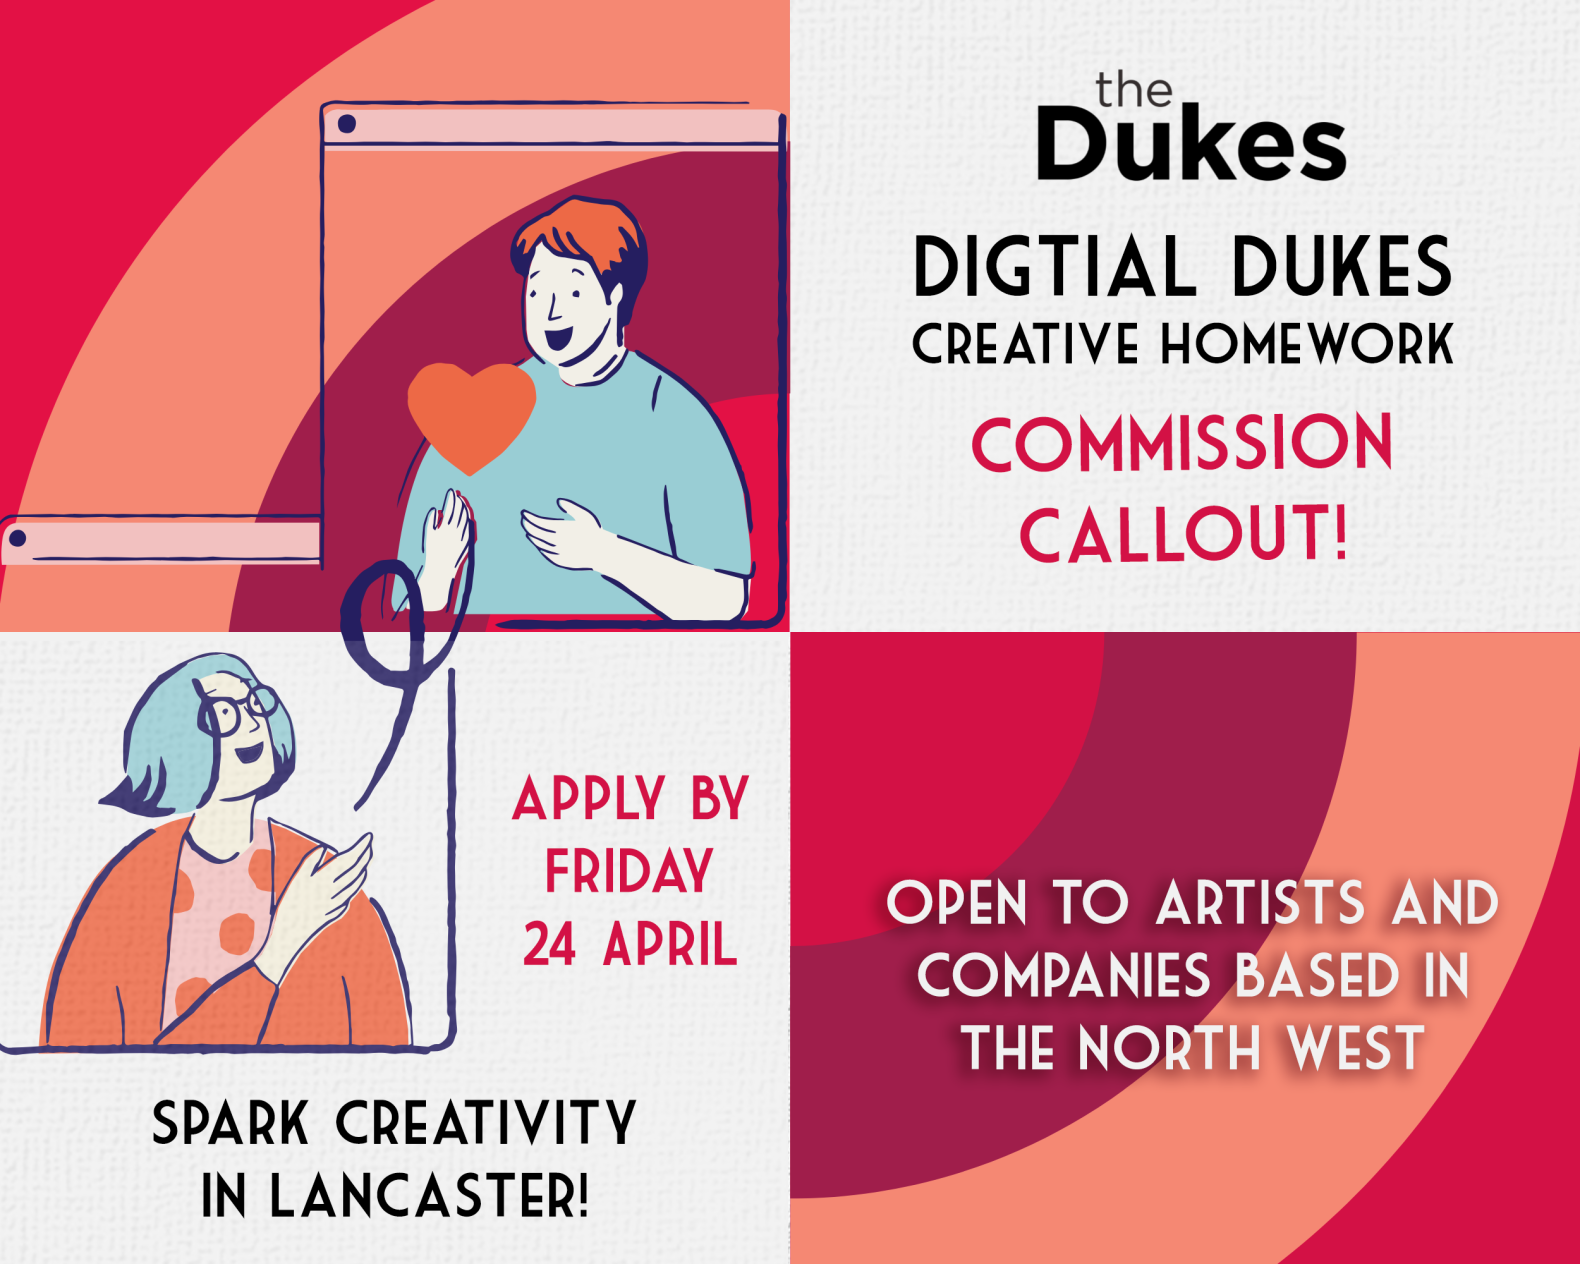 Call Out to Creatives: Digital Dukes Creative Homework Commission